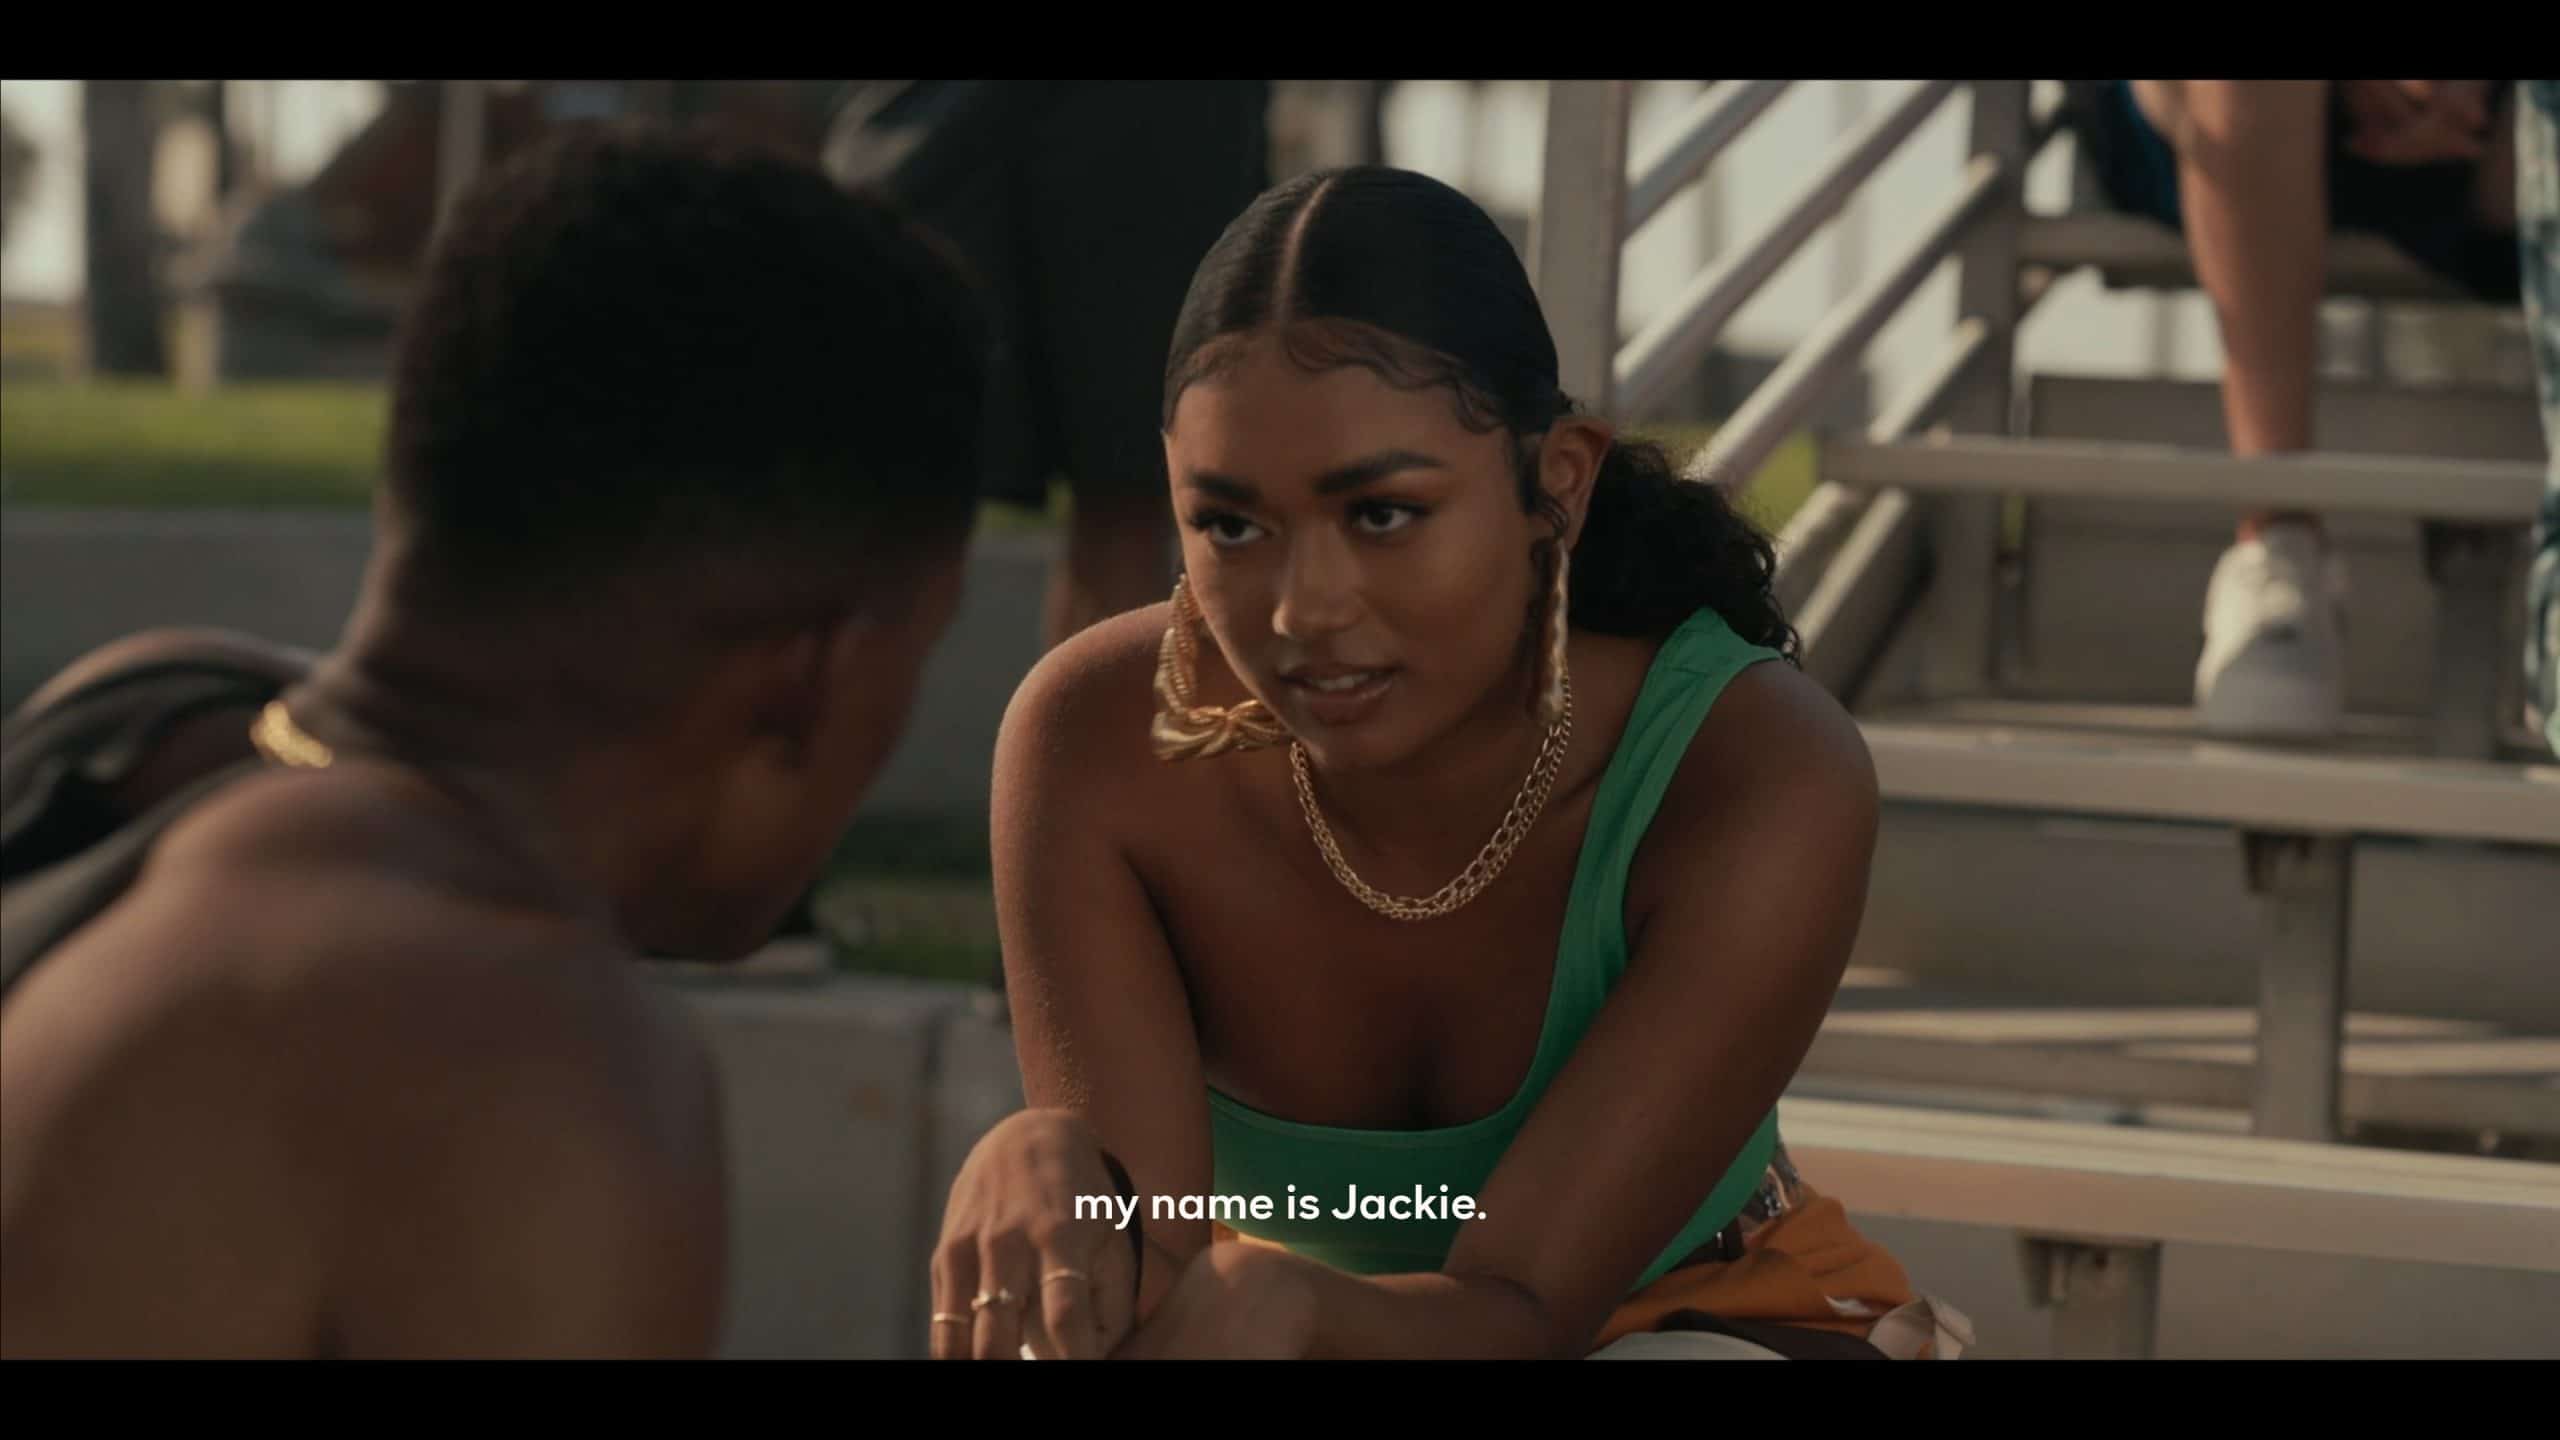 Jazlyn Martin as Jackie properly introducing herself to Will